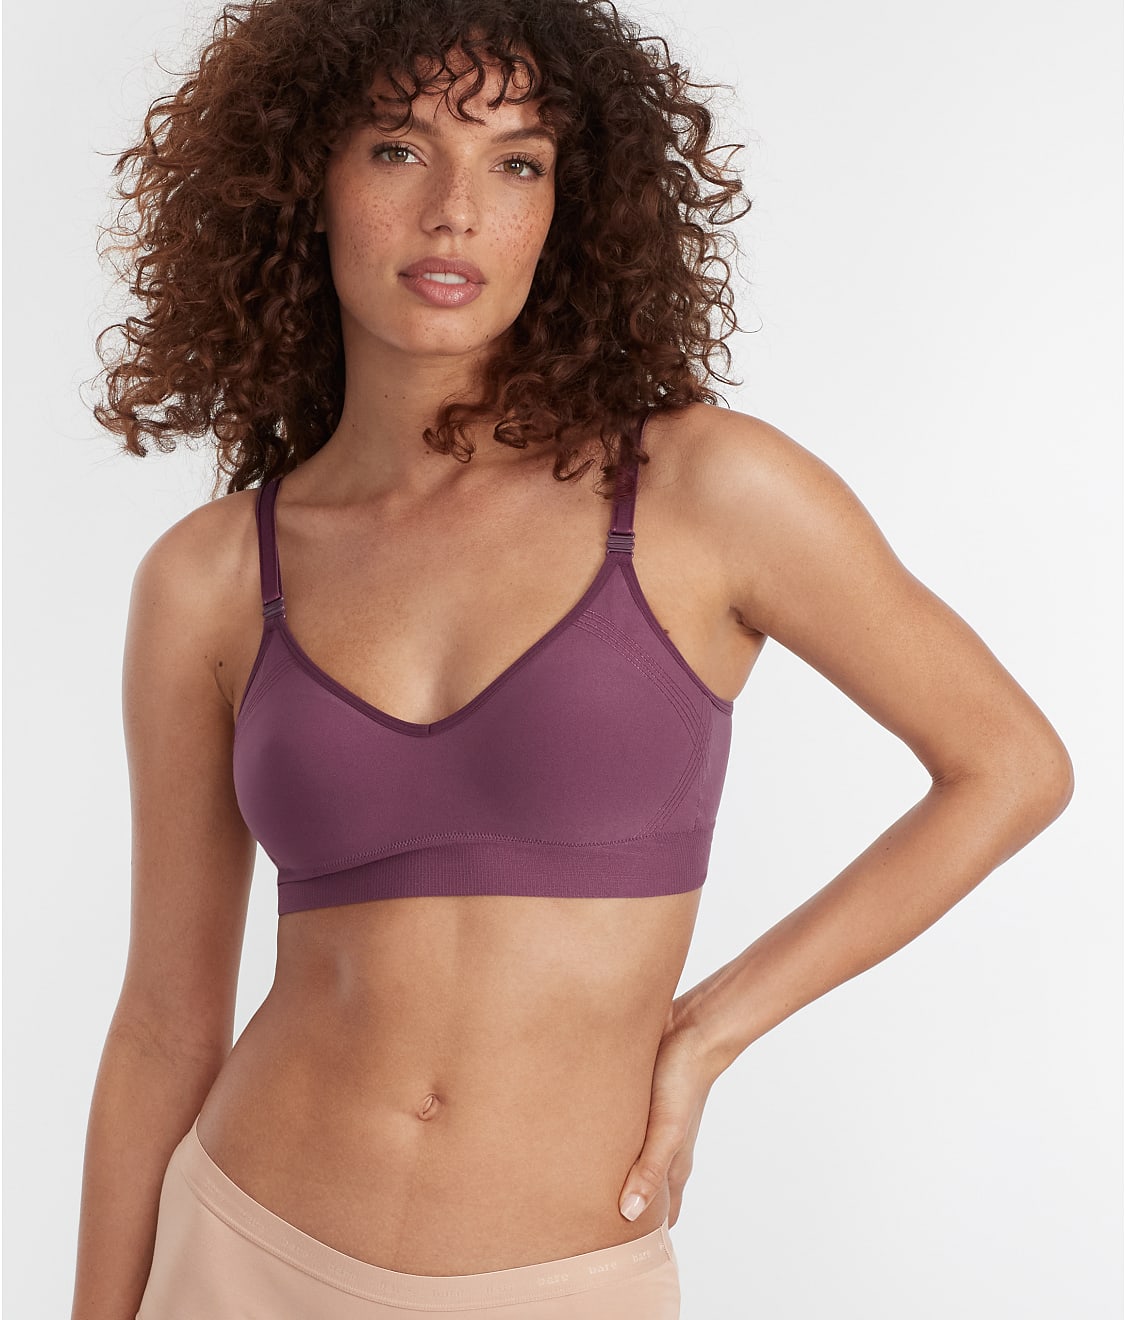 Easy Does It Wire-Free Convertible Bra